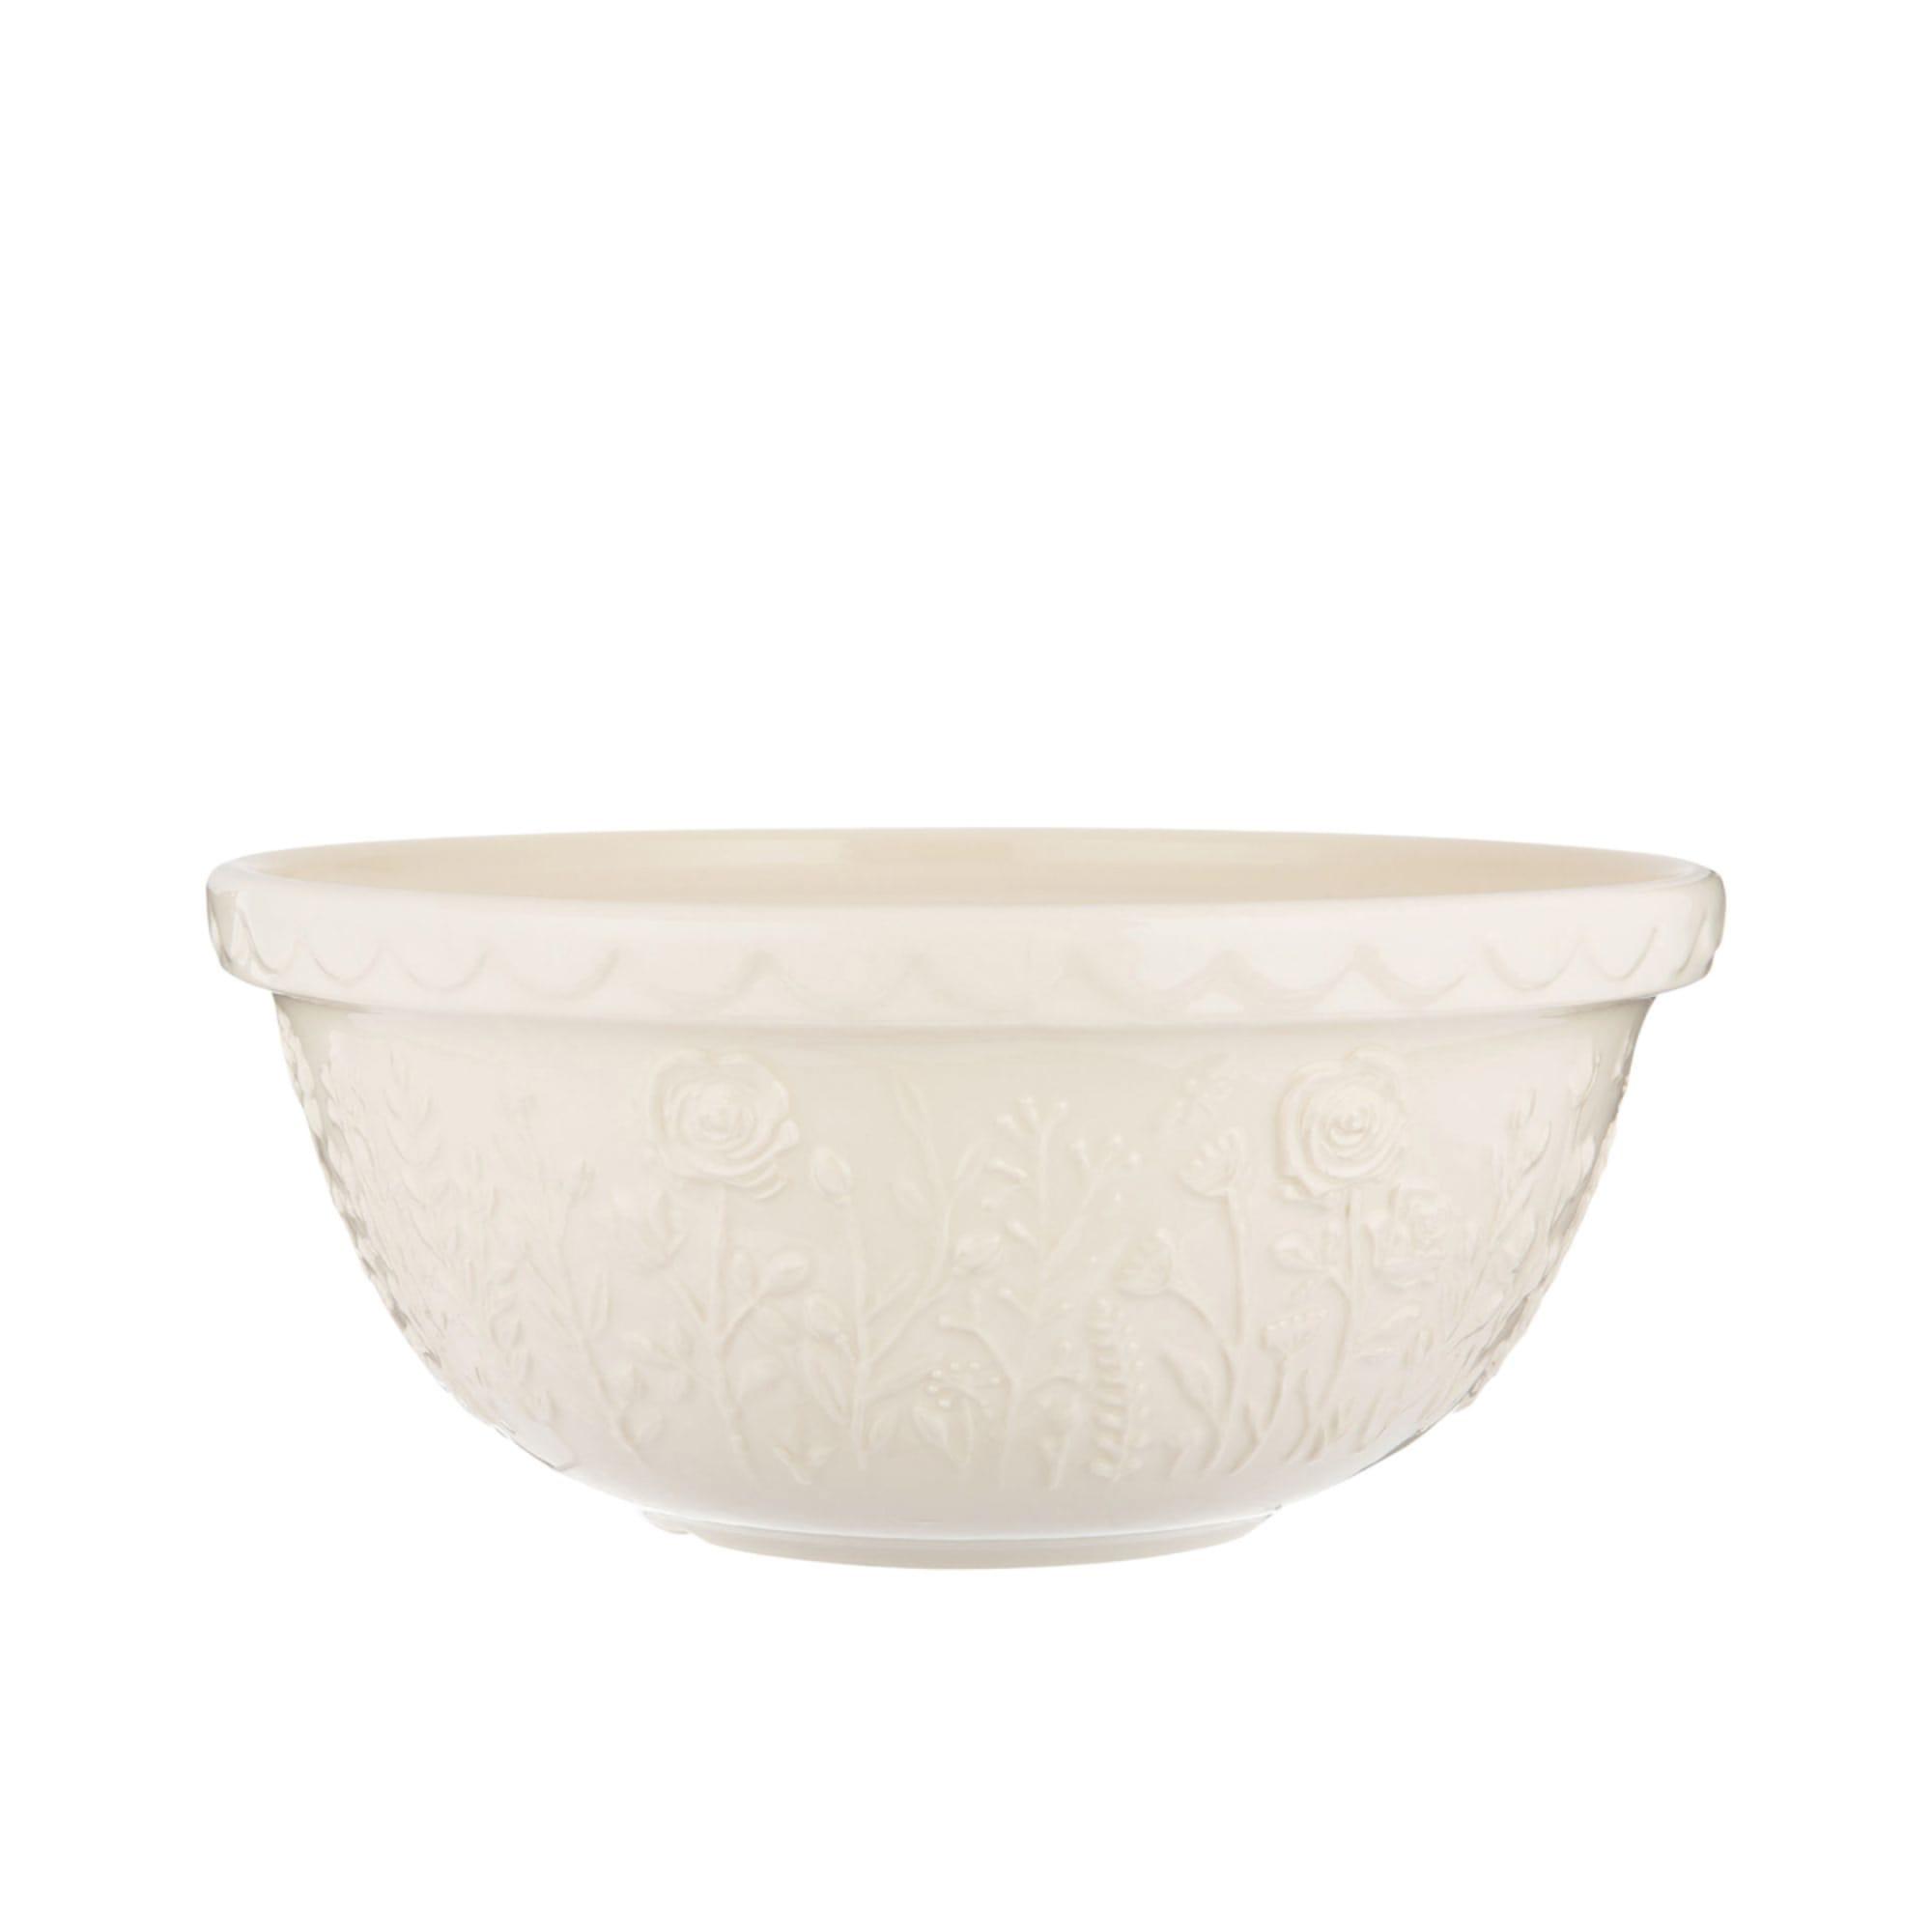 Mason Cash In The Meadow Rose Mixing Bowl 29cm - 4L Cream Image 1